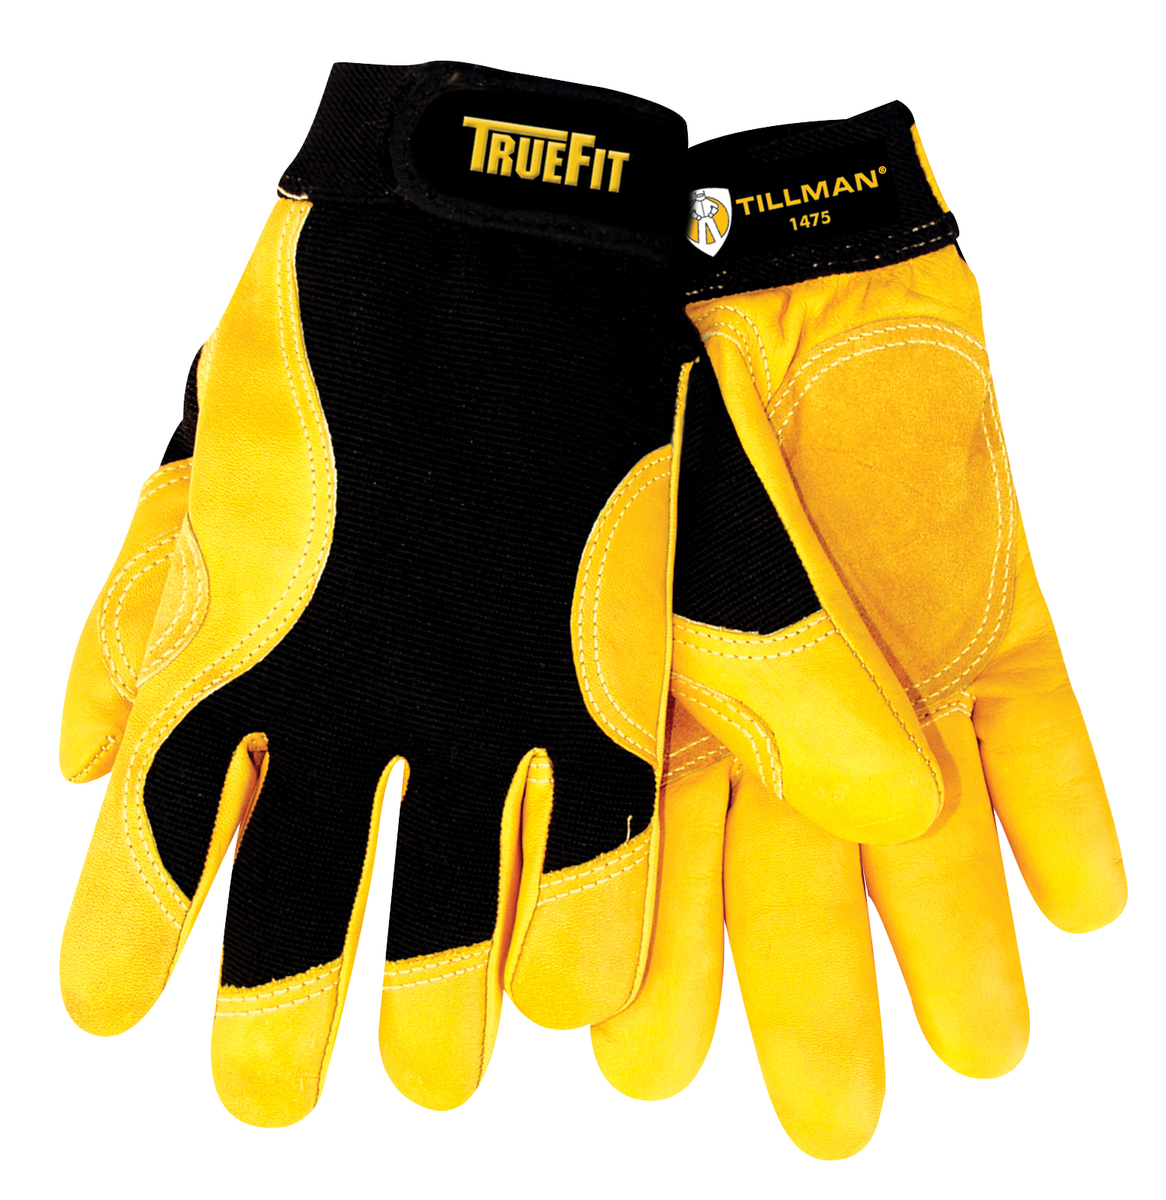 Tillman® Large Black And Gold TrueFit™ Cowhide And Spandex® Full Finger Mechanics Gloves With Elastic/Hook And Loop Cuff